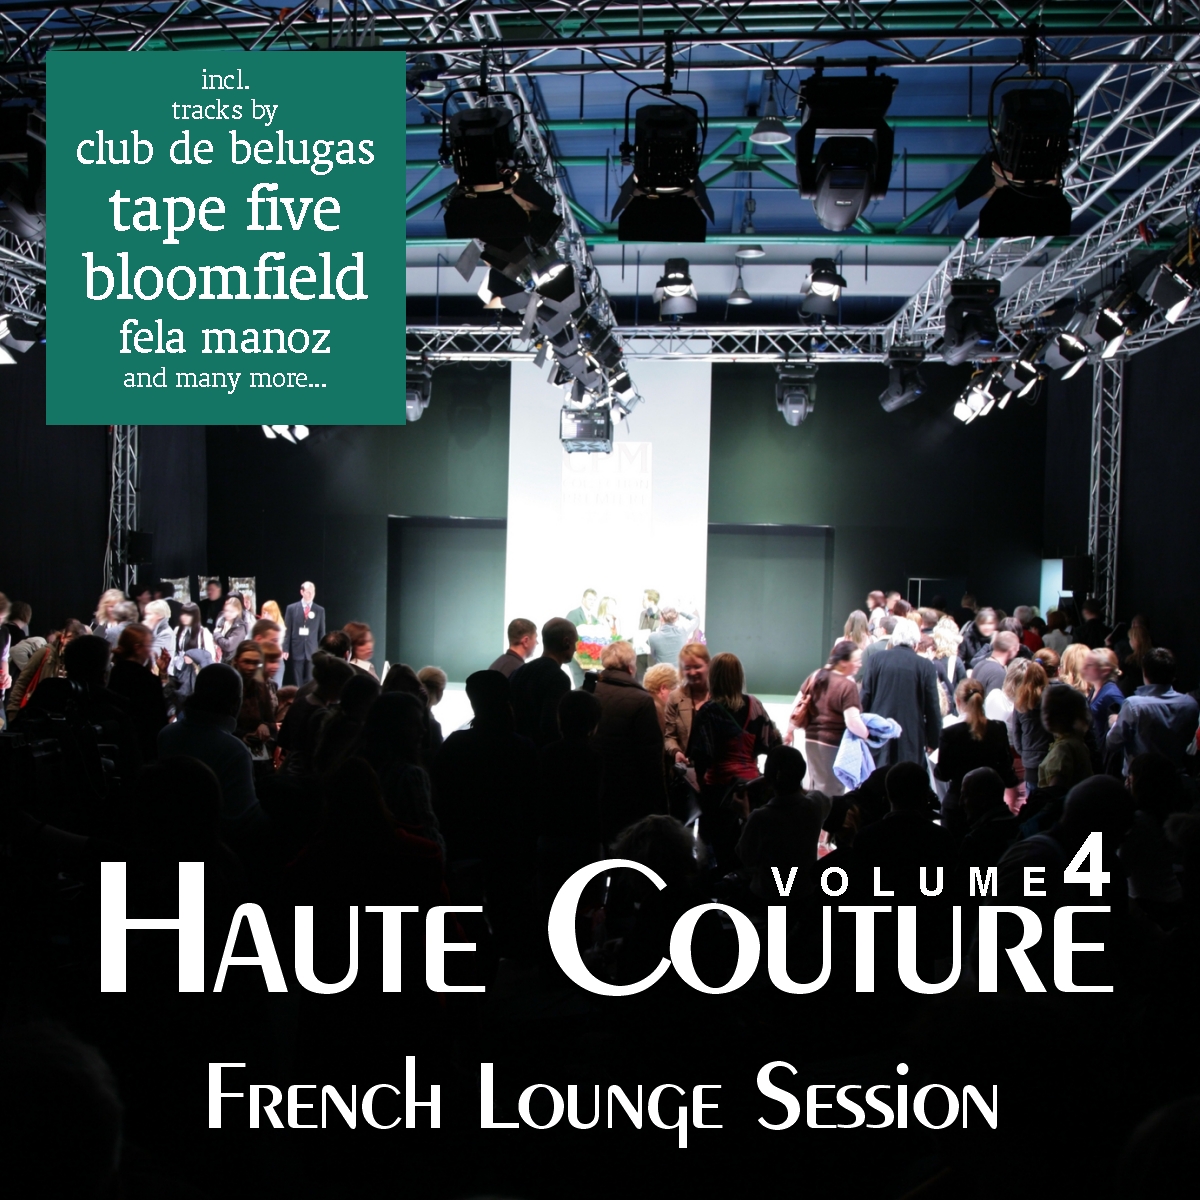 Haute Couture, Vol. 4 - French Lounge Session